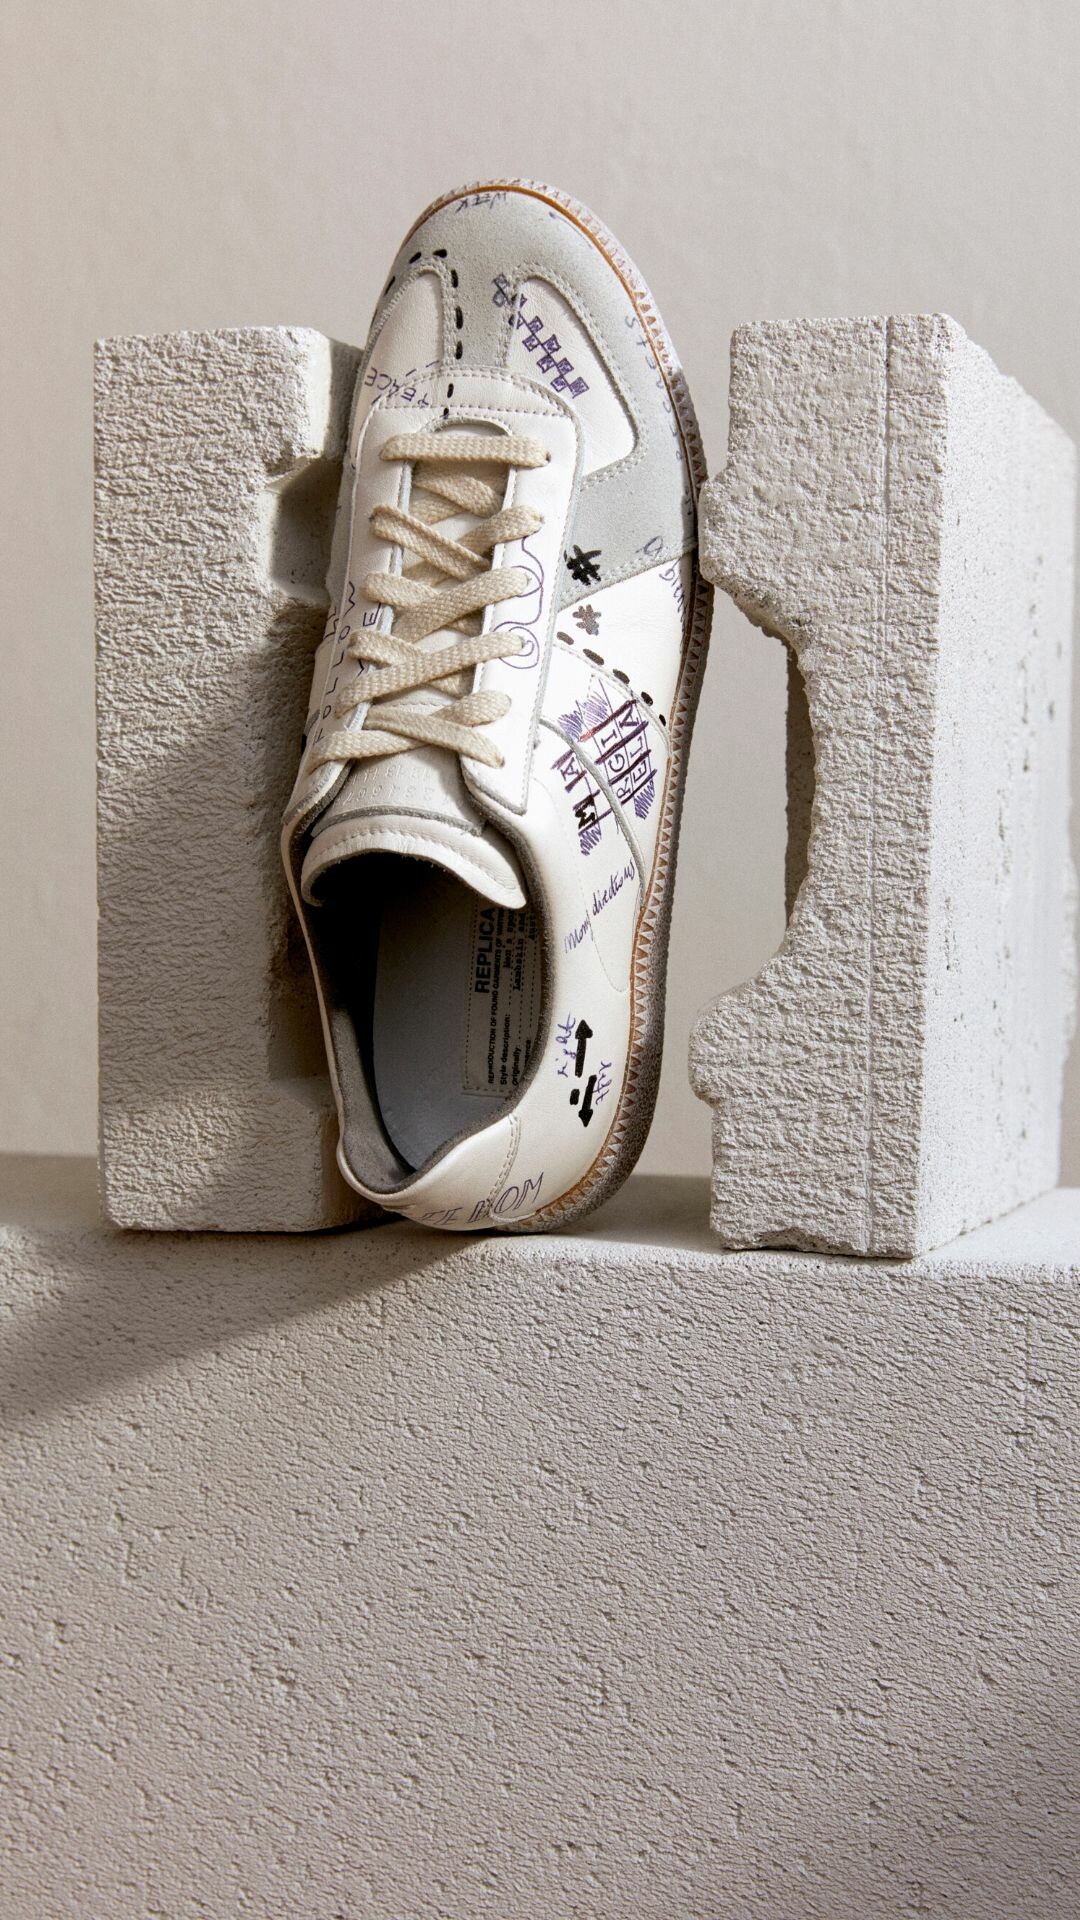 Maison Margiela: The iconoclastic, avant-garde fashion house, founded in Paris in 1988, 'Vintage Replica' trainers. 1080x1920 Full HD Background.